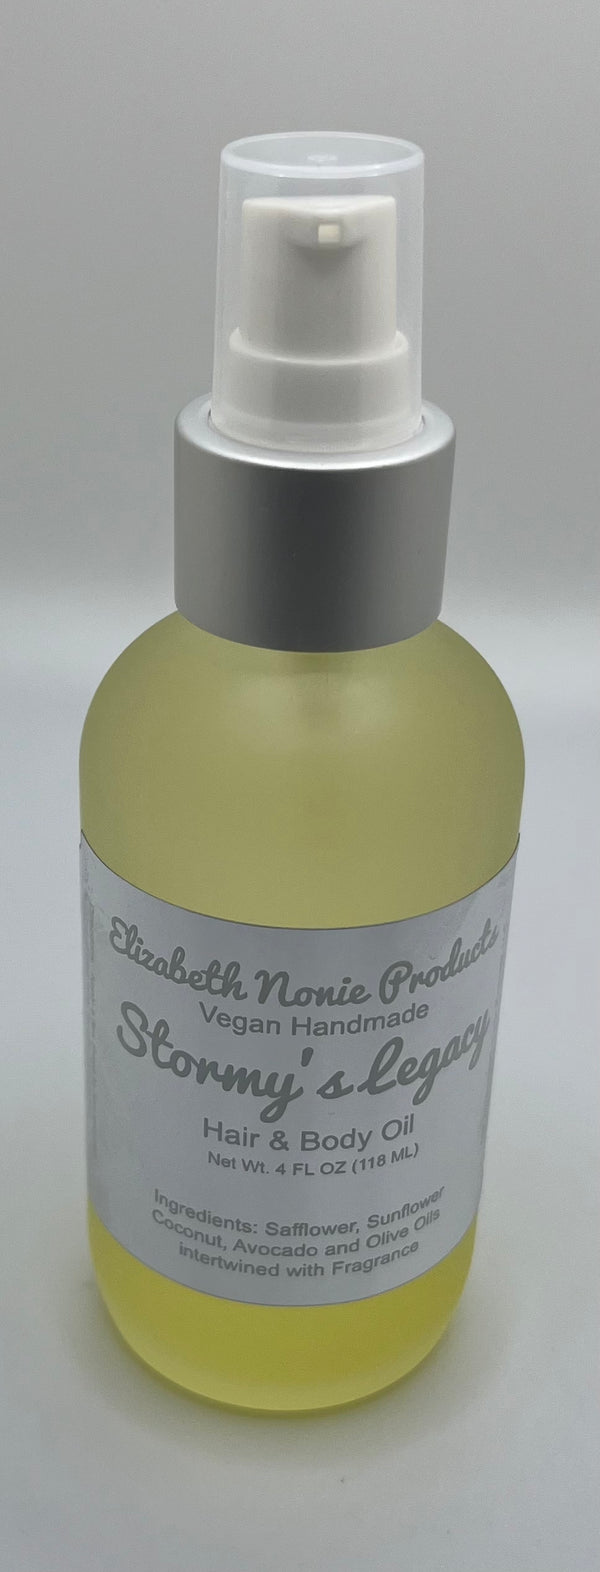 Stormy’s Legacy Hair and Body Oil